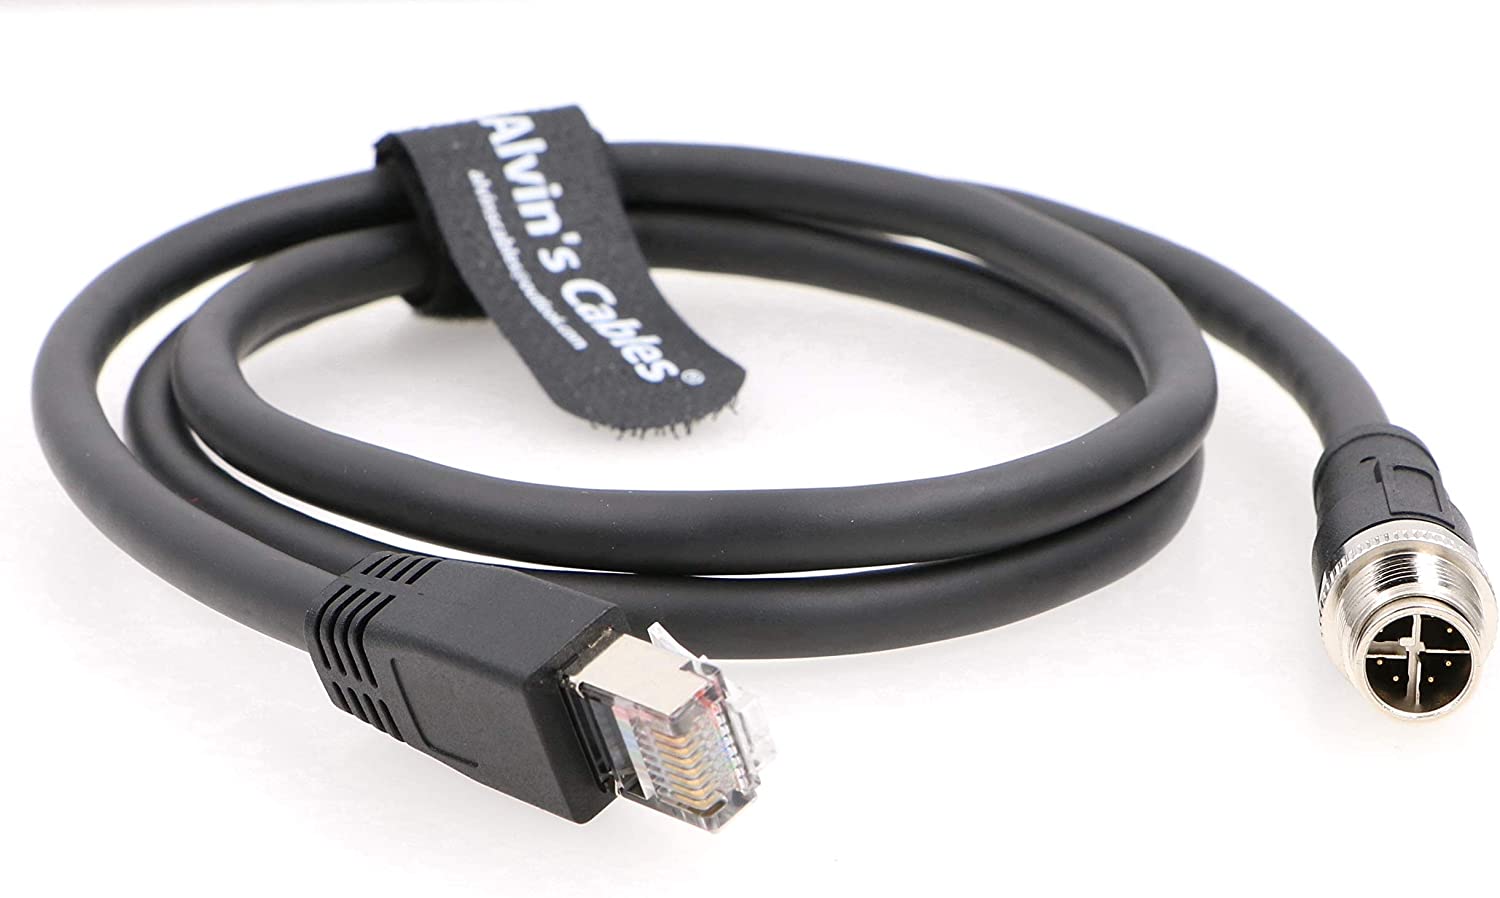 Alvin's Cables M12 8 Pin X Code to RJ45 for Ethernet Cable for Cognex in Sight 8400 Series CCB-84901-2001-01 IP67 Waterproof Shielded Cord